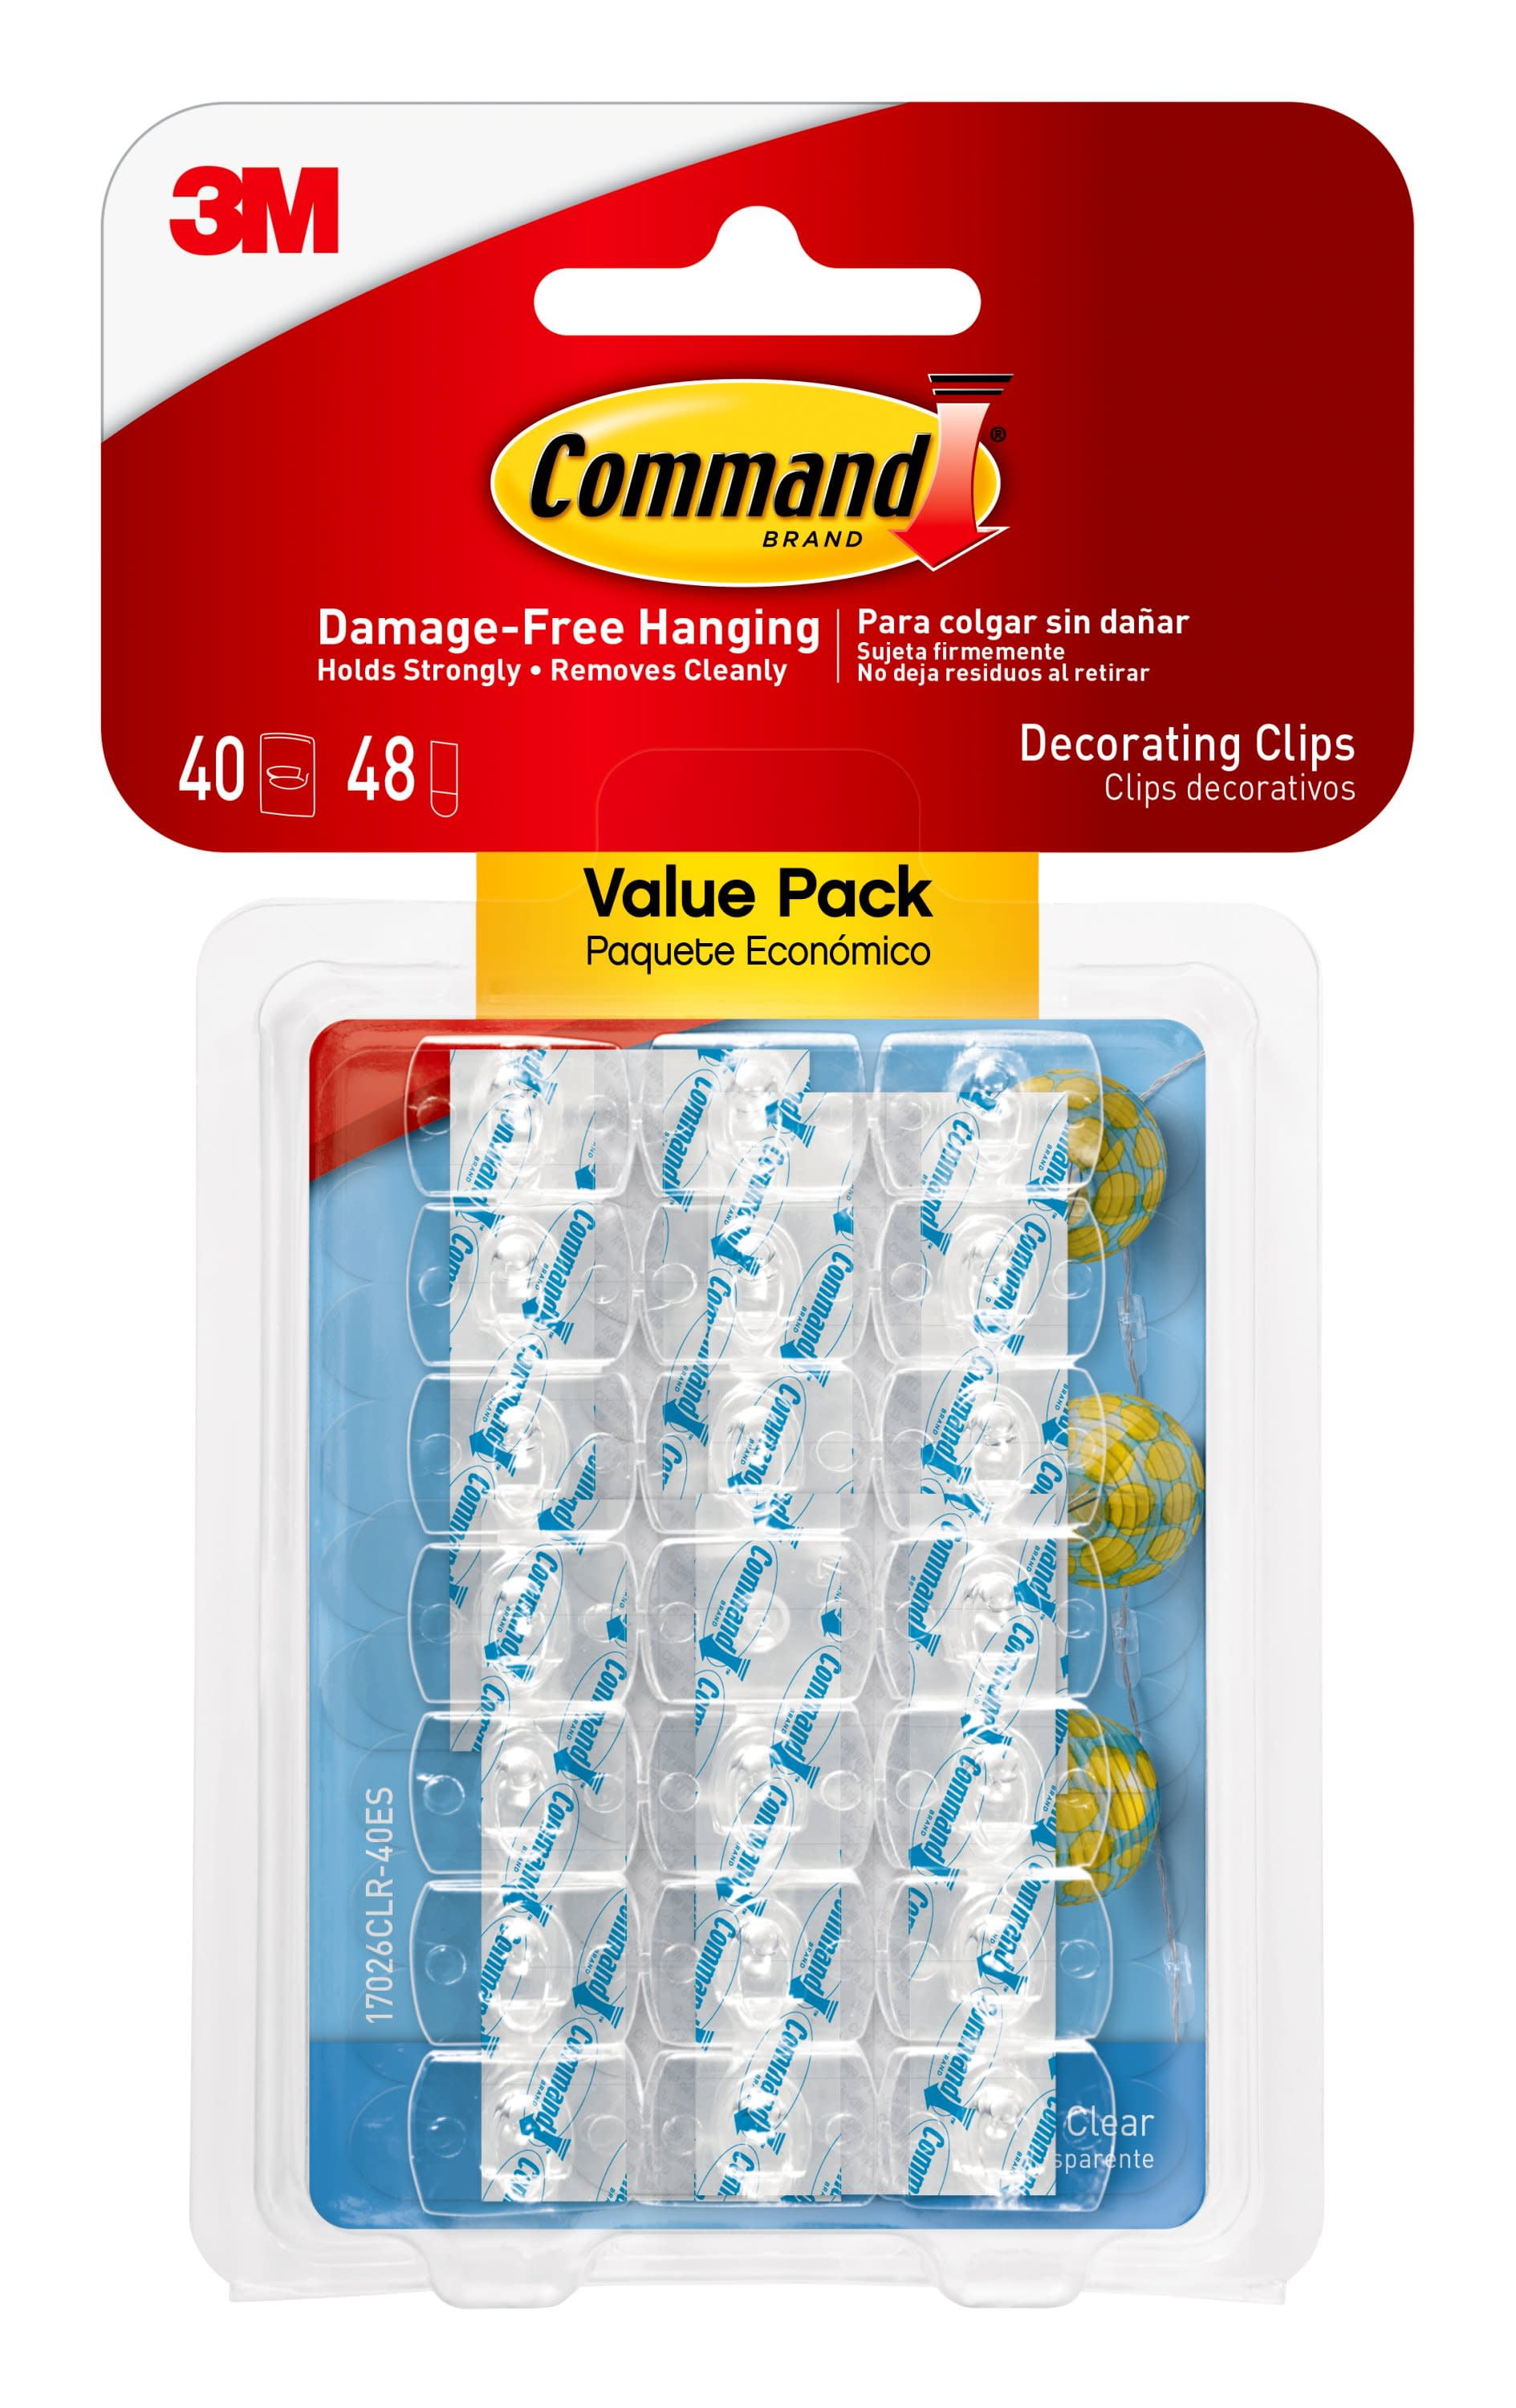 Command Self Adhesive Outdoor Decorating Clips